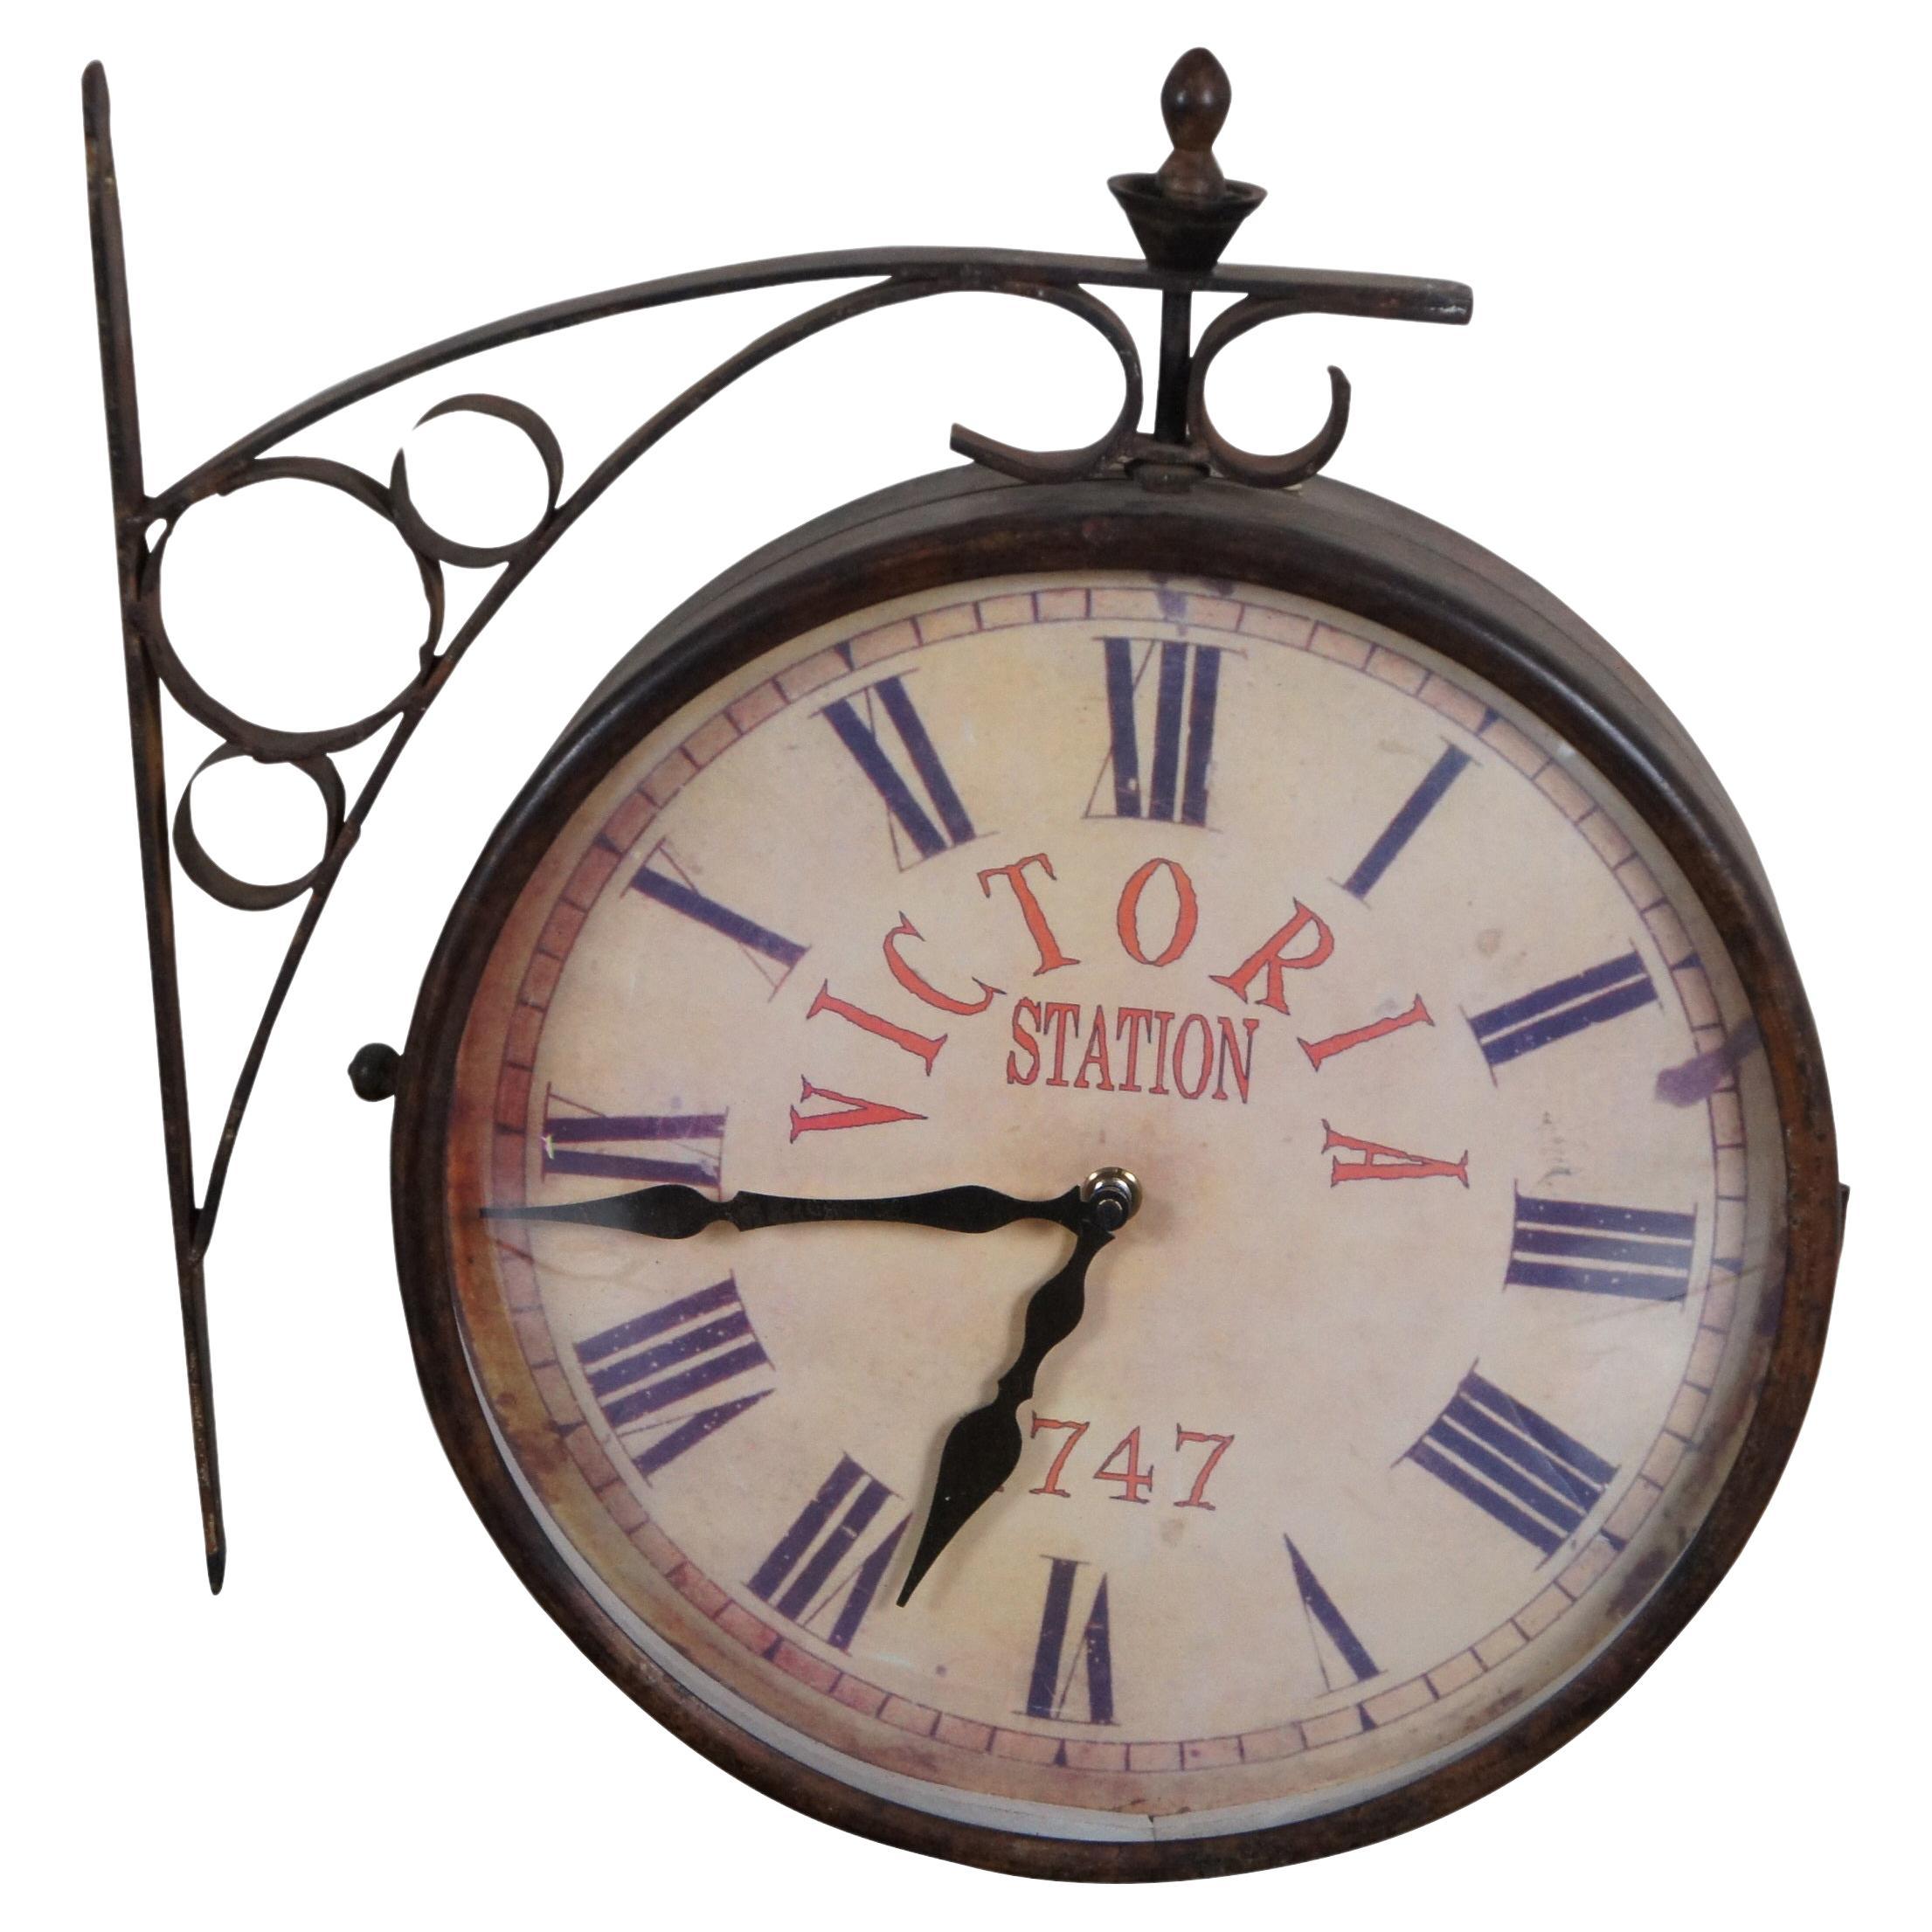 Vintage Victoria Station 1747 Double Sided Brass Wall Mount Railway Clock 18" For Sale